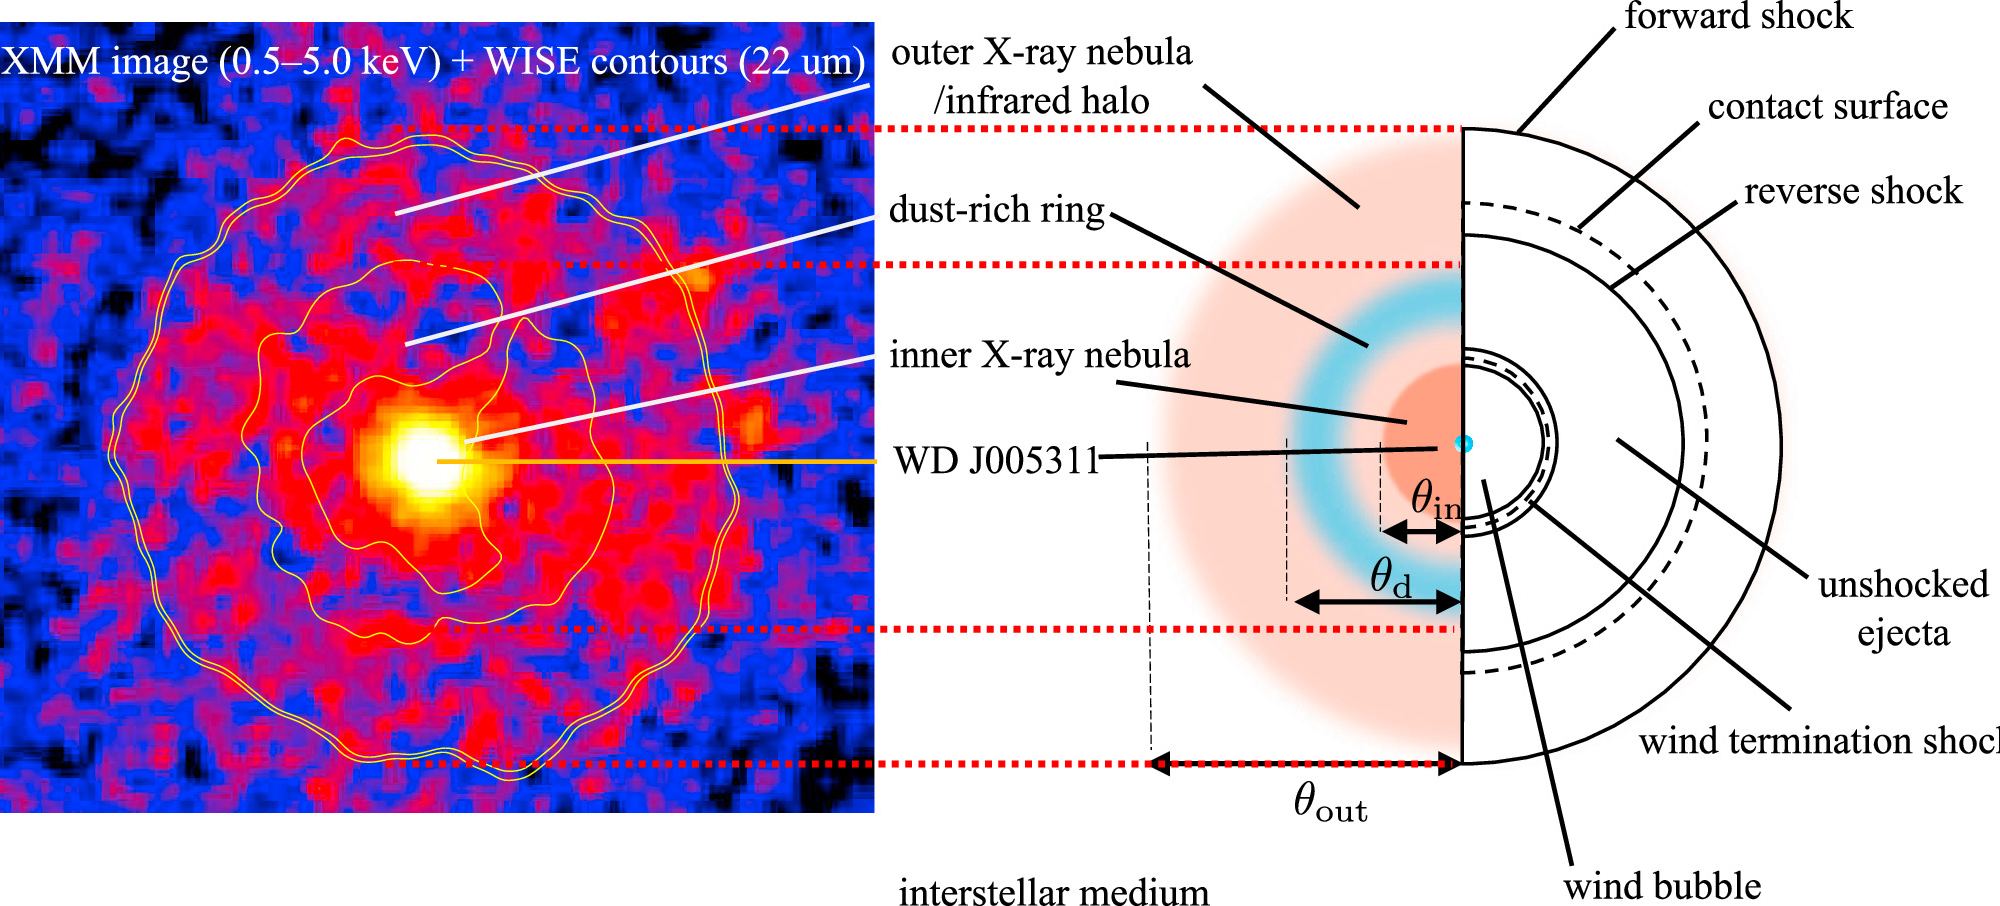 A comparison between the observed XMM-Newton image of the kilonova 1181 with an IRAS-derived schematic of infrared contours (presumably of the dust ring) around the resulting white dwarf. This kilonova occurred when two white dwarfs collided and were observed in 1181. Courtesy Ko, et al, 2024.